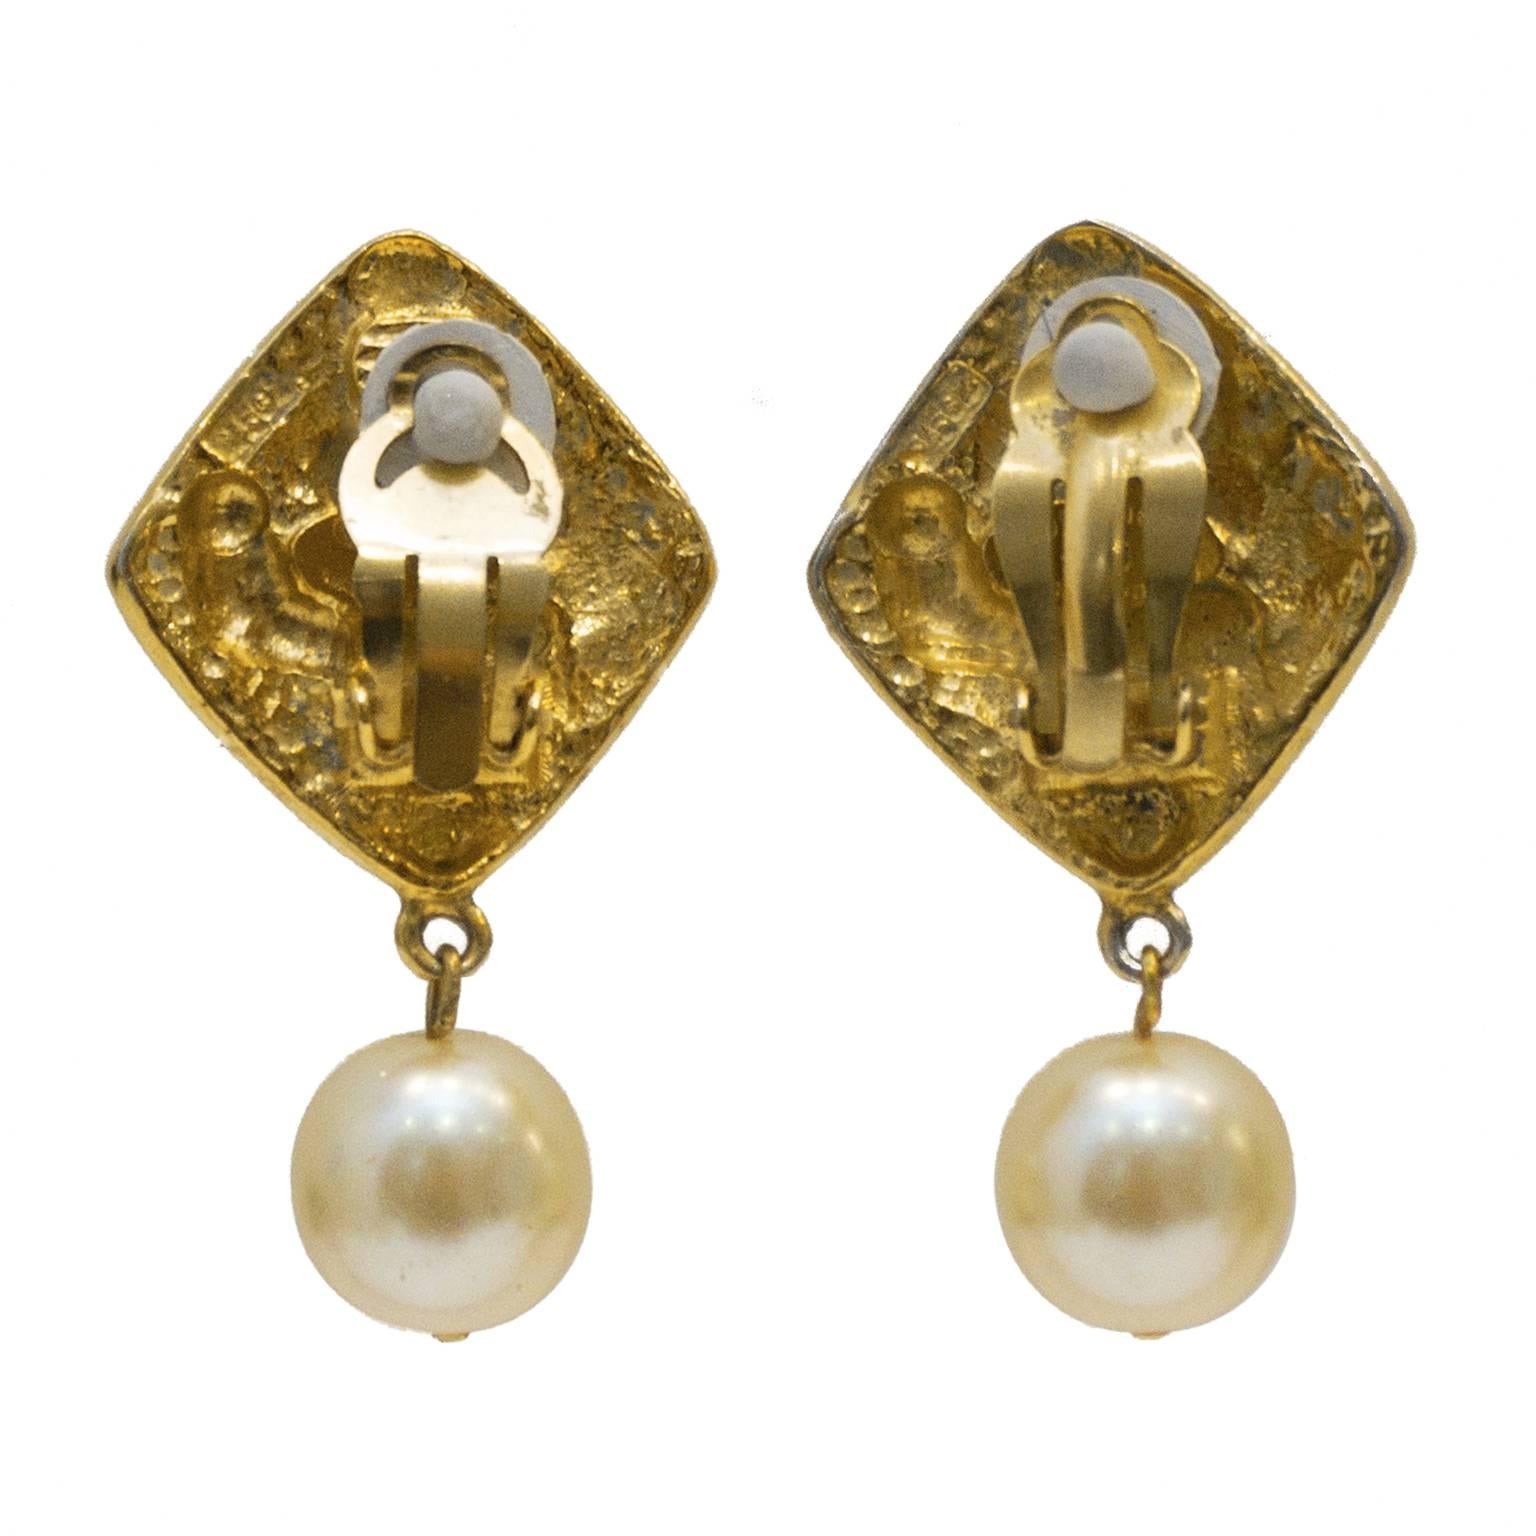 Early 1980's Chanel diamond shaped pearl drop earrings. The clip on style earrings are made up of a gold plated diamond shaped piece decorated with swirl and ball pattern with a small CC at the center. Large faux pearl drop hangs below. In excellent